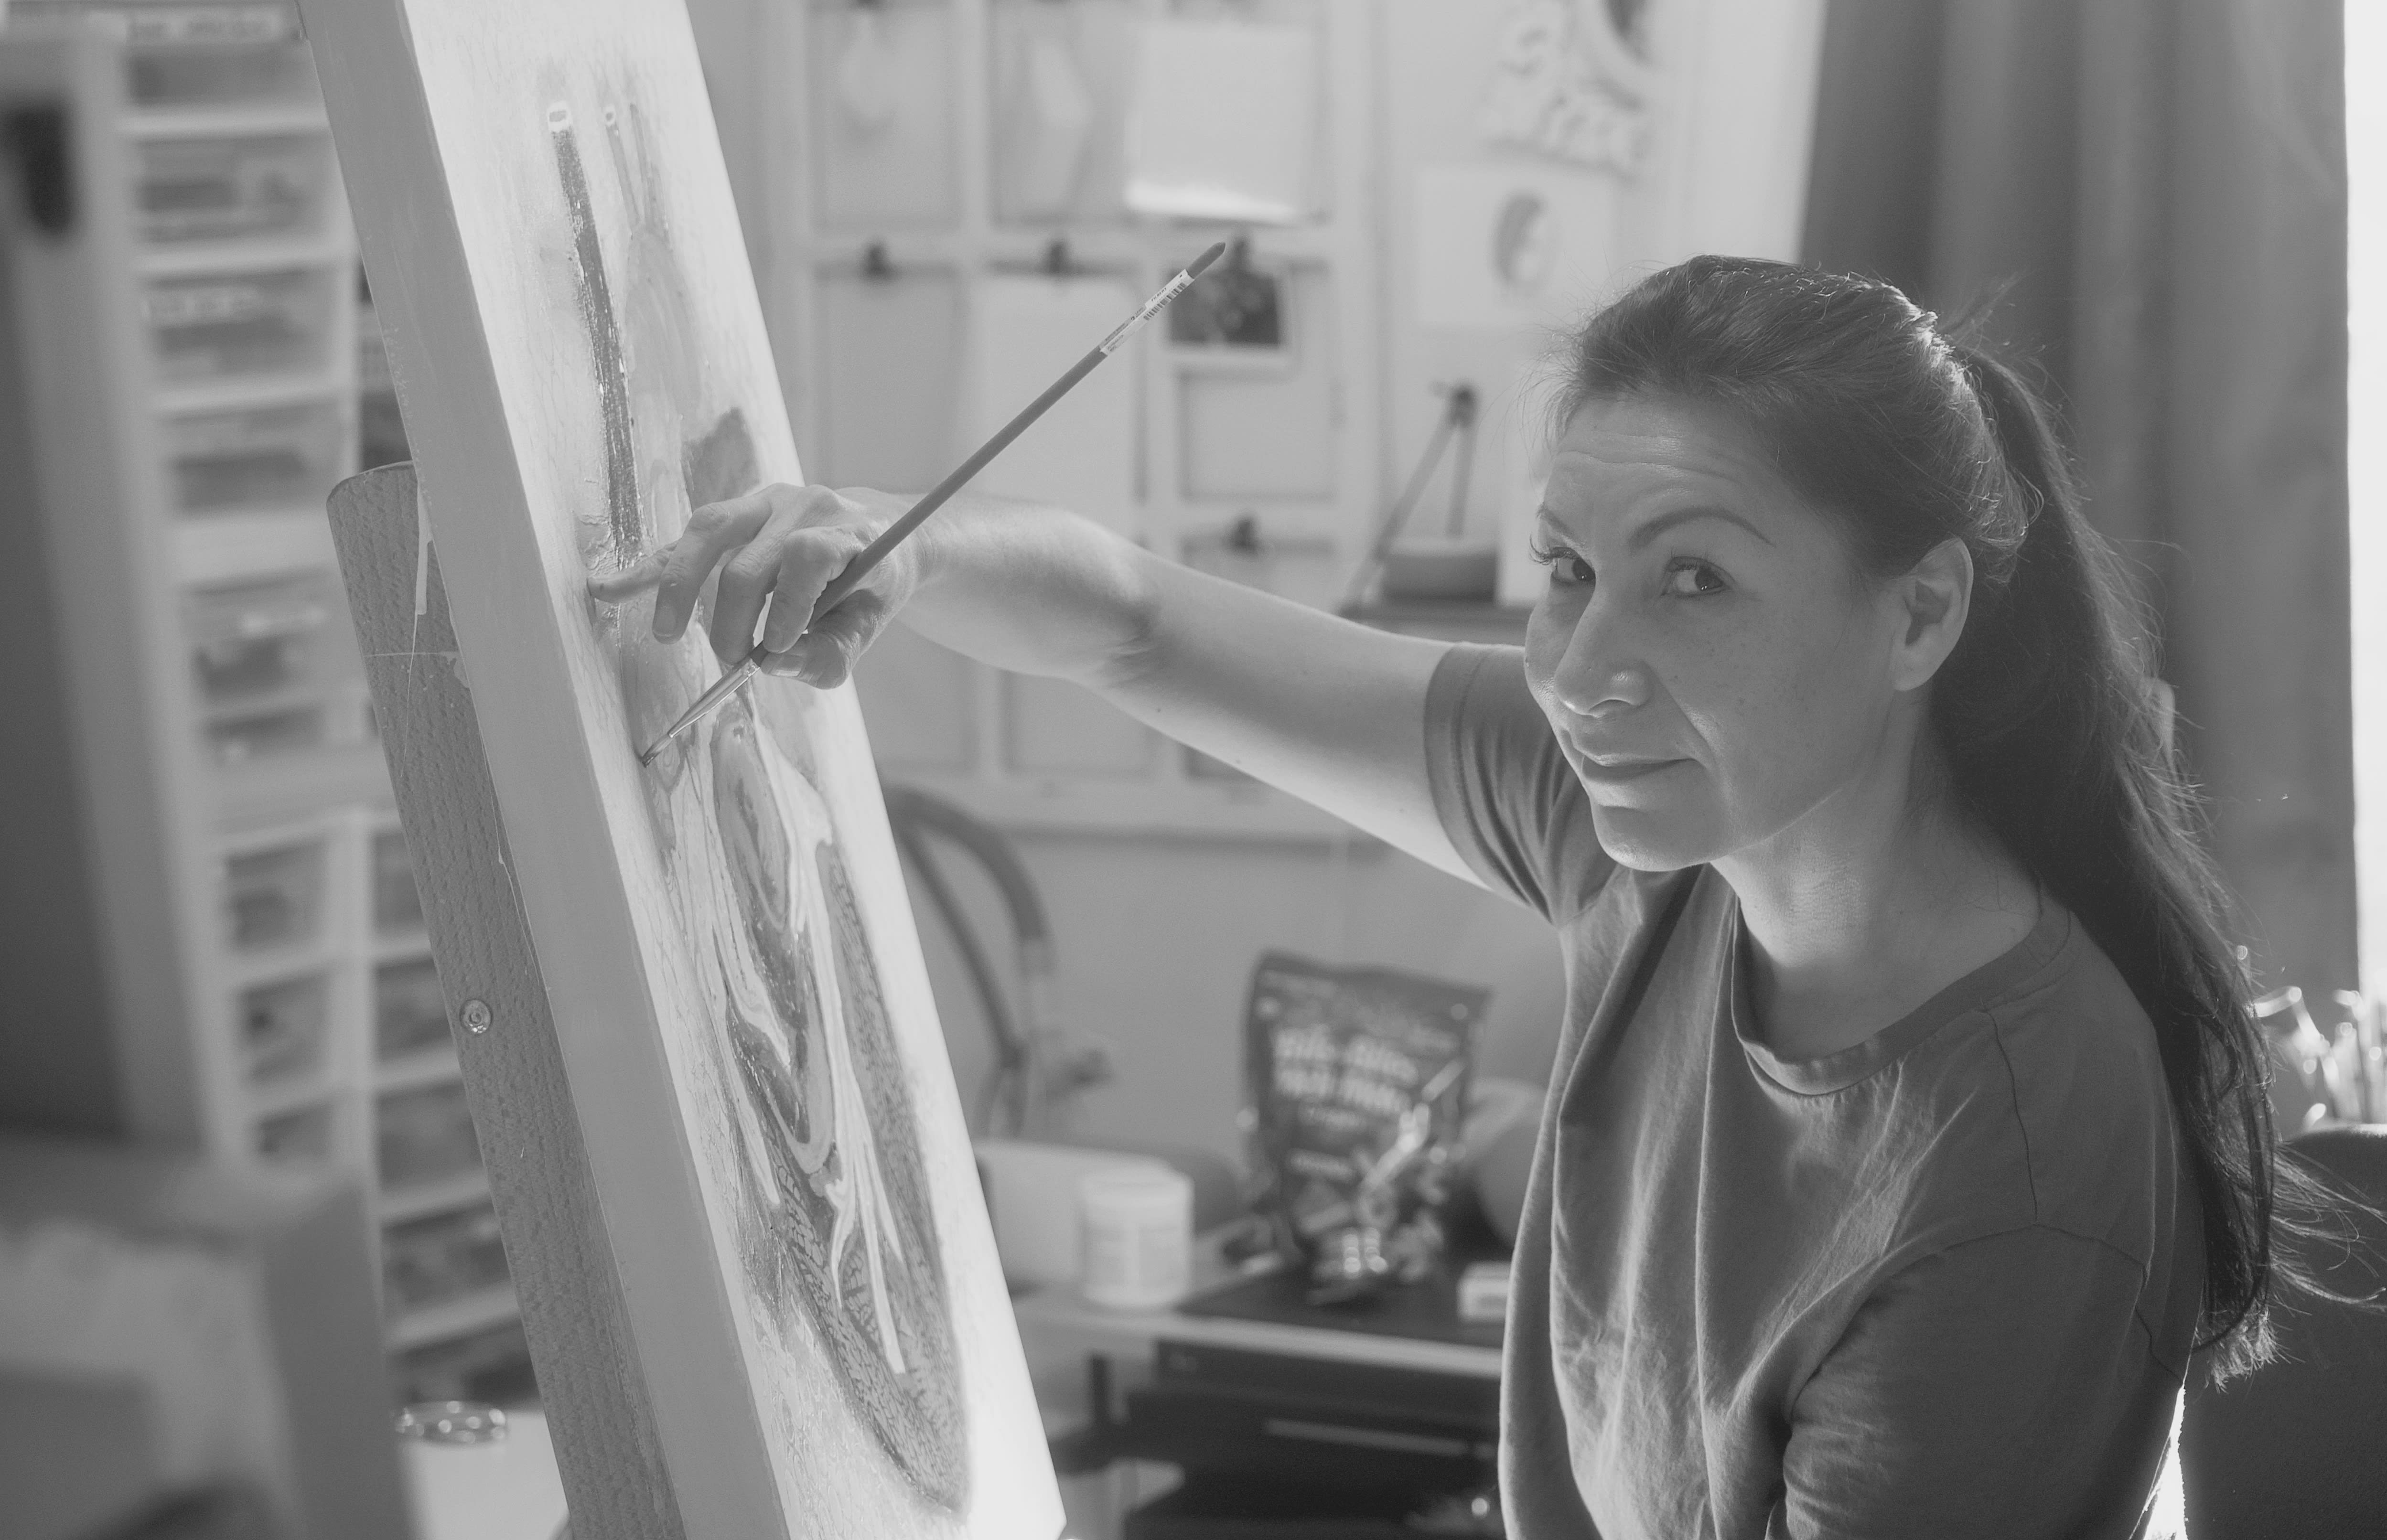 A black and white photo of a woman looking at the camera while she sits at an easel painting.